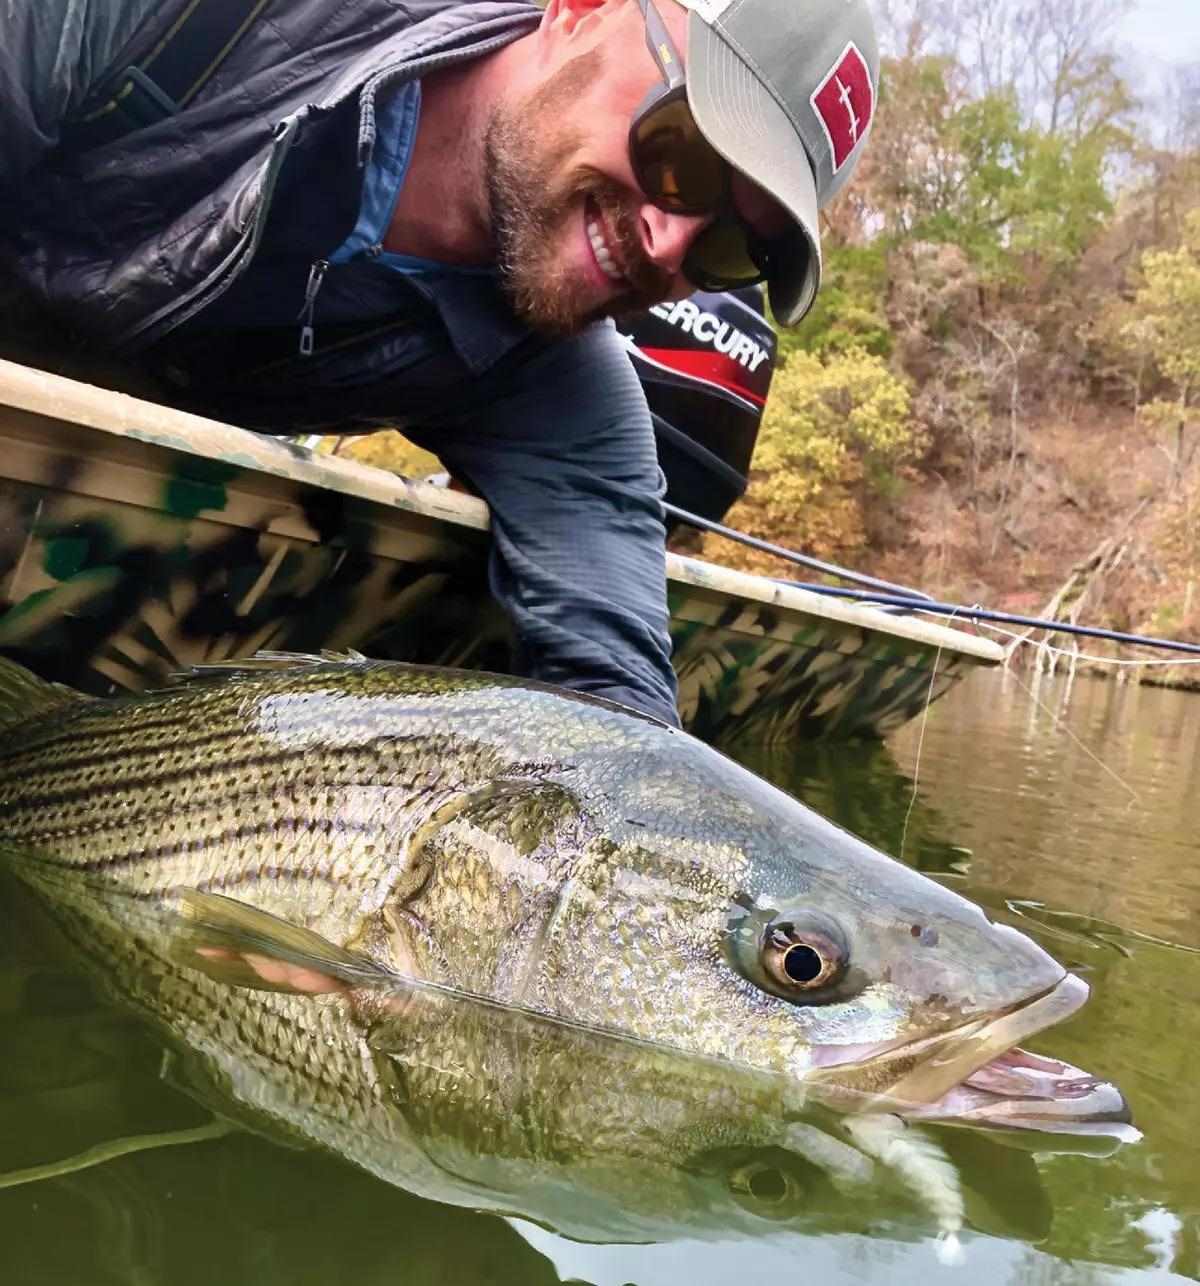 Cold outside? Let's fish for striper bass, Sports